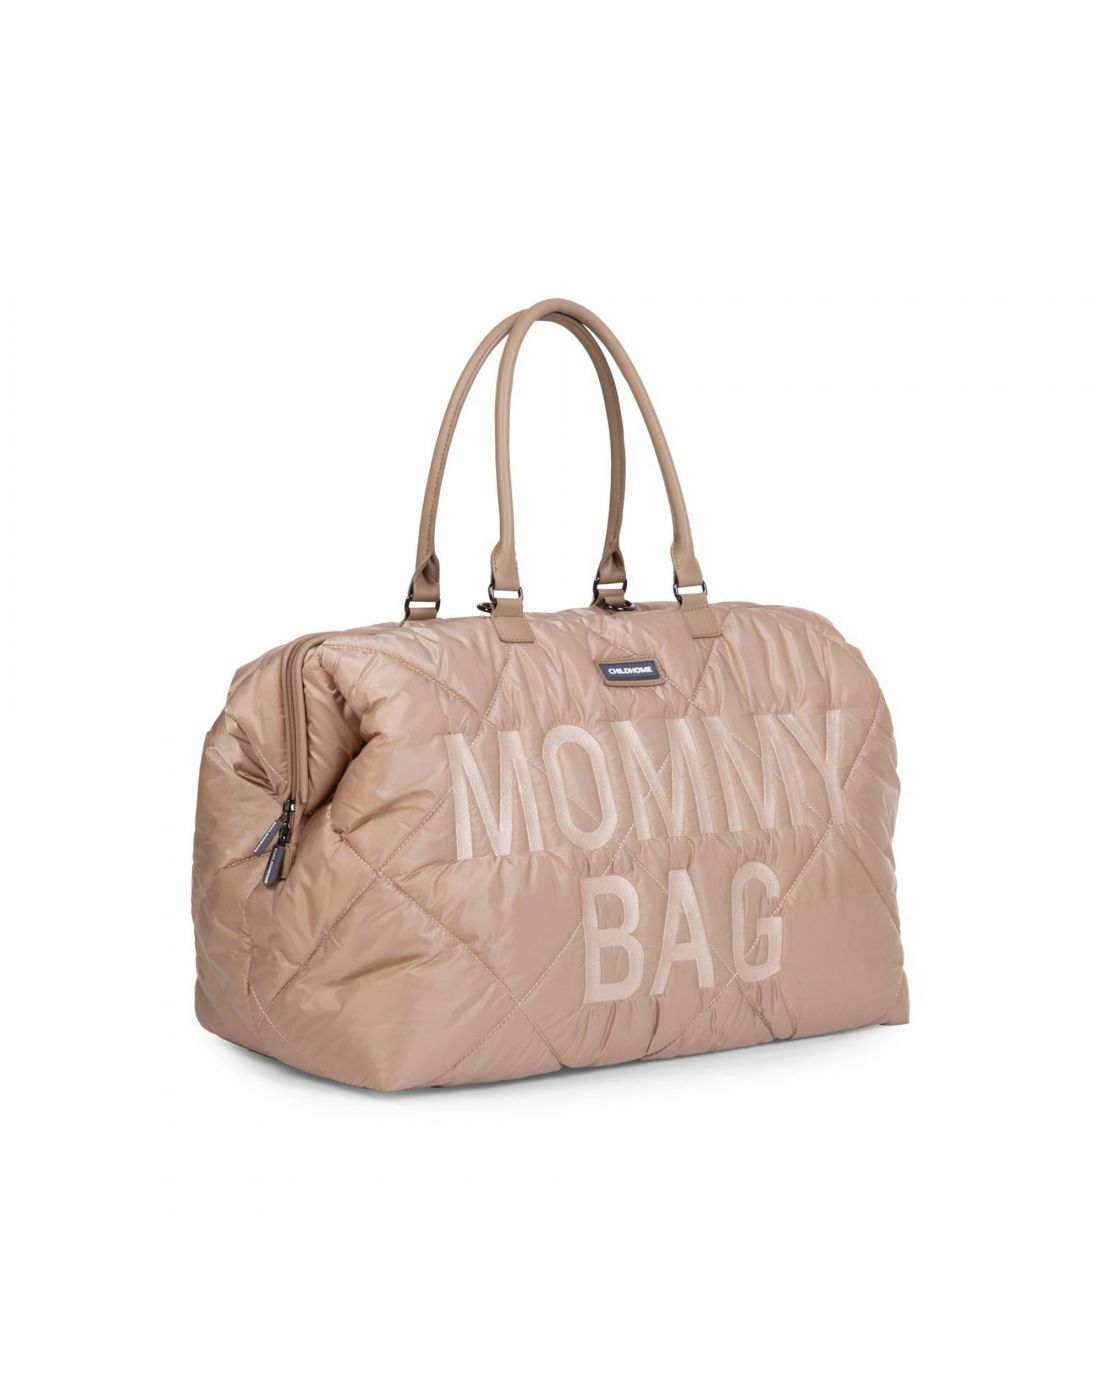 Childhome Mommy Bag Puffered Beige